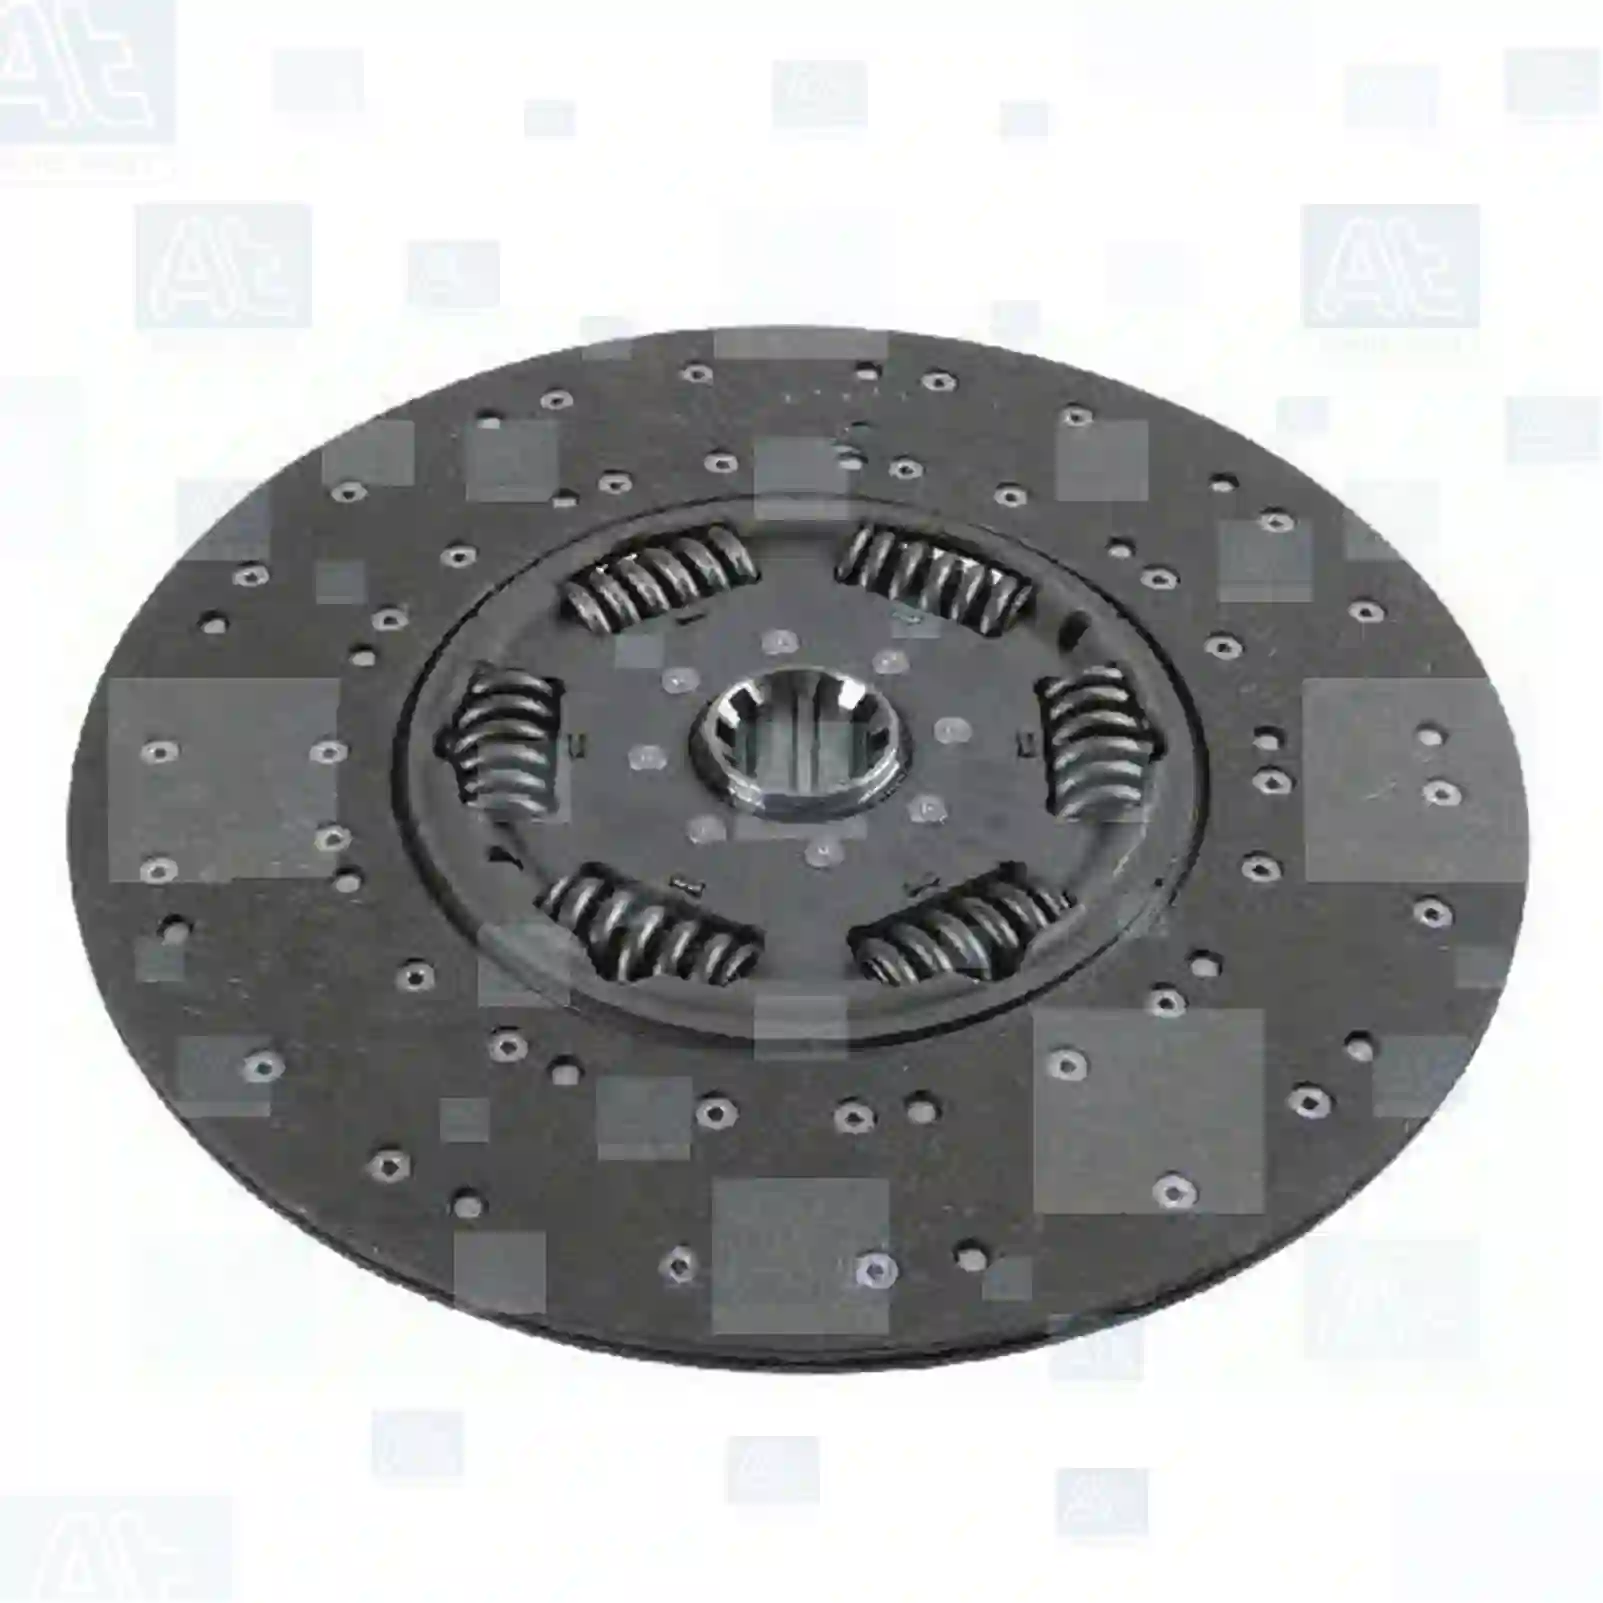 Clutch disc, 77721905, 193852, 1440715, 1450120, 1614294, 1689145, 1813472, 1813472A, 1813472R, 31250EOA80, 81303010352, 81303010460, 81303010476, 81303010485, 81303010496, 81303010503, 81303010506, 81303010507, 81303010511, 81303010533, 81303010534, 81303010545, 81303010546, 81303010547, 81303010548, 81303010549, 81303010559, 81303010567, 81303010570, 81303010572, 81303010620, 81303010623, 81303010626, 81303010677, 81303010679, 81303019496, 81303019506, 81303019549, 81303019623, 81303019677, 81303019679, 0072505803, 0072505903, 007250590380, 0092502103, 0092503103, 0112500603, 0122501403, 0122501503, 0122505303, 0132500803, 0132502003, 0132502103, 013250210380, 0132503003, 0132503903, 0152500203, 0152502303, 0152503803, 0162501703, 0162501803, 0162504303, 0162504403, 0172507803, 0182507803, 0182509303, 018250930380, 0192500803, 0192503303, 0192504503, 0192506803, 0202501603, 0202505103, 0202505403, 0202505703, 0202509003, 0222506103, 011009992, 011079828, 0182509903, 8383286000, 10996020, 10996025, 11442962 ||  77721905 At Spare Part | Engine, Accelerator Pedal, Camshaft, Connecting Rod, Crankcase, Crankshaft, Cylinder Head, Engine Suspension Mountings, Exhaust Manifold, Exhaust Gas Recirculation, Filter Kits, Flywheel Housing, General Overhaul Kits, Engine, Intake Manifold, Oil Cleaner, Oil Cooler, Oil Filter, Oil Pump, Oil Sump, Piston & Liner, Sensor & Switch, Timing Case, Turbocharger, Cooling System, Belt Tensioner, Coolant Filter, Coolant Pipe, Corrosion Prevention Agent, Drive, Expansion Tank, Fan, Intercooler, Monitors & Gauges, Radiator, Thermostat, V-Belt / Timing belt, Water Pump, Fuel System, Electronical Injector Unit, Feed Pump, Fuel Filter, cpl., Fuel Gauge Sender,  Fuel Line, Fuel Pump, Fuel Tank, Injection Line Kit, Injection Pump, Exhaust System, Clutch & Pedal, Gearbox, Propeller Shaft, Axles, Brake System, Hubs & Wheels, Suspension, Leaf Spring, Universal Parts / Accessories, Steering, Electrical System, Cabin Clutch disc, 77721905, 193852, 1440715, 1450120, 1614294, 1689145, 1813472, 1813472A, 1813472R, 31250EOA80, 81303010352, 81303010460, 81303010476, 81303010485, 81303010496, 81303010503, 81303010506, 81303010507, 81303010511, 81303010533, 81303010534, 81303010545, 81303010546, 81303010547, 81303010548, 81303010549, 81303010559, 81303010567, 81303010570, 81303010572, 81303010620, 81303010623, 81303010626, 81303010677, 81303010679, 81303019496, 81303019506, 81303019549, 81303019623, 81303019677, 81303019679, 0072505803, 0072505903, 007250590380, 0092502103, 0092503103, 0112500603, 0122501403, 0122501503, 0122505303, 0132500803, 0132502003, 0132502103, 013250210380, 0132503003, 0132503903, 0152500203, 0152502303, 0152503803, 0162501703, 0162501803, 0162504303, 0162504403, 0172507803, 0182507803, 0182509303, 018250930380, 0192500803, 0192503303, 0192504503, 0192506803, 0202501603, 0202505103, 0202505403, 0202505703, 0202509003, 0222506103, 011009992, 011079828, 0182509903, 8383286000, 10996020, 10996025, 11442962 ||  77721905 At Spare Part | Engine, Accelerator Pedal, Camshaft, Connecting Rod, Crankcase, Crankshaft, Cylinder Head, Engine Suspension Mountings, Exhaust Manifold, Exhaust Gas Recirculation, Filter Kits, Flywheel Housing, General Overhaul Kits, Engine, Intake Manifold, Oil Cleaner, Oil Cooler, Oil Filter, Oil Pump, Oil Sump, Piston & Liner, Sensor & Switch, Timing Case, Turbocharger, Cooling System, Belt Tensioner, Coolant Filter, Coolant Pipe, Corrosion Prevention Agent, Drive, Expansion Tank, Fan, Intercooler, Monitors & Gauges, Radiator, Thermostat, V-Belt / Timing belt, Water Pump, Fuel System, Electronical Injector Unit, Feed Pump, Fuel Filter, cpl., Fuel Gauge Sender,  Fuel Line, Fuel Pump, Fuel Tank, Injection Line Kit, Injection Pump, Exhaust System, Clutch & Pedal, Gearbox, Propeller Shaft, Axles, Brake System, Hubs & Wheels, Suspension, Leaf Spring, Universal Parts / Accessories, Steering, Electrical System, Cabin